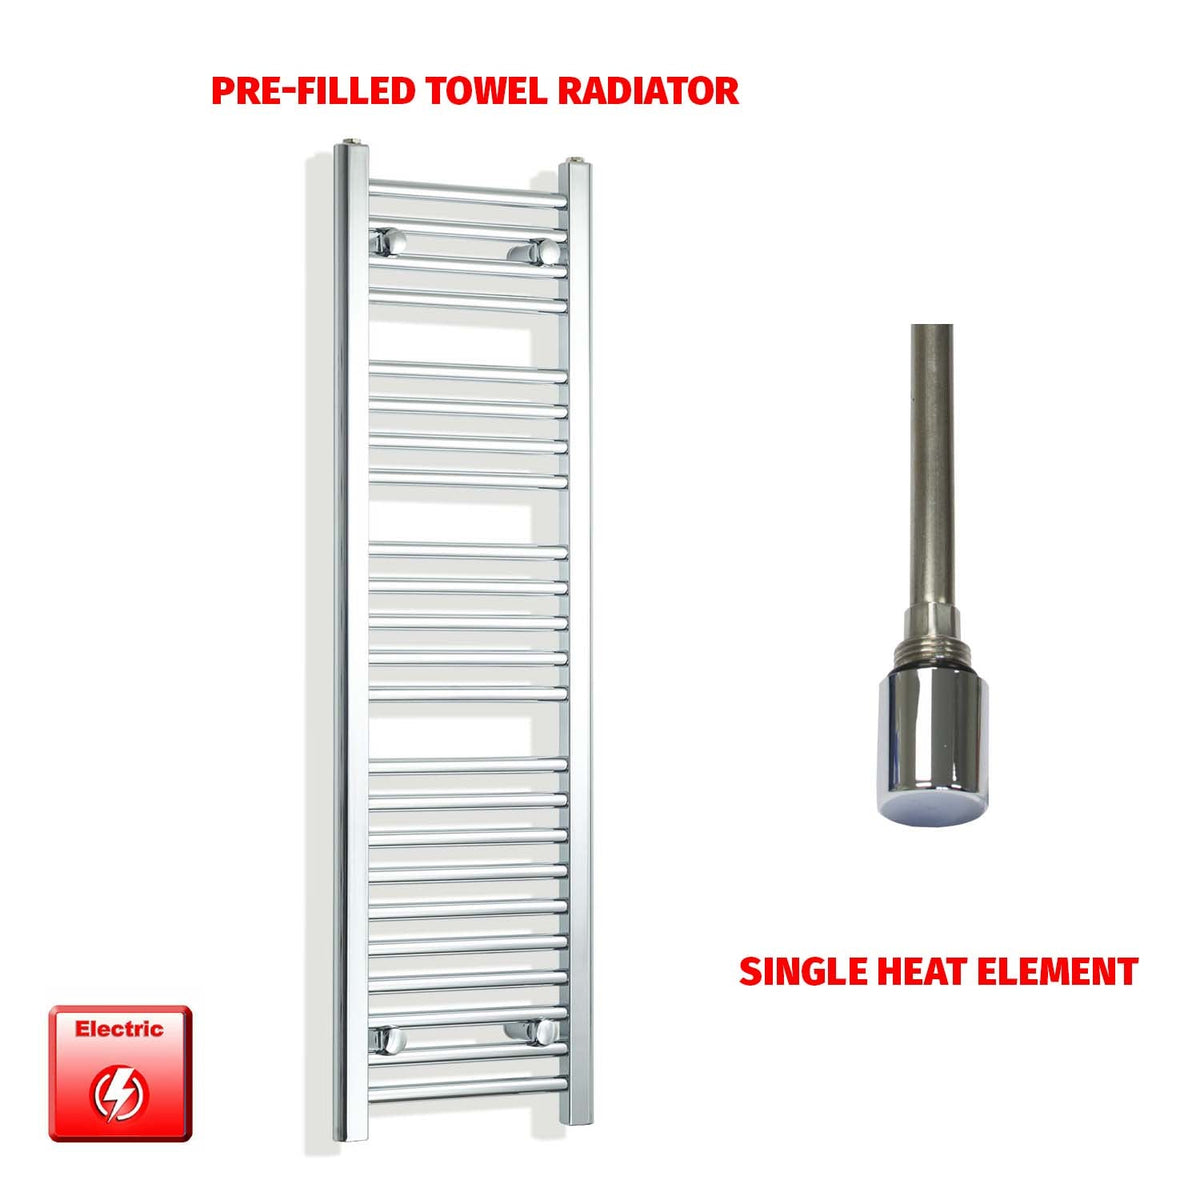 1200mm High 300mm Wide Pre-Filled Electric Heated Towel Rail Radiator Straight Chrome single element